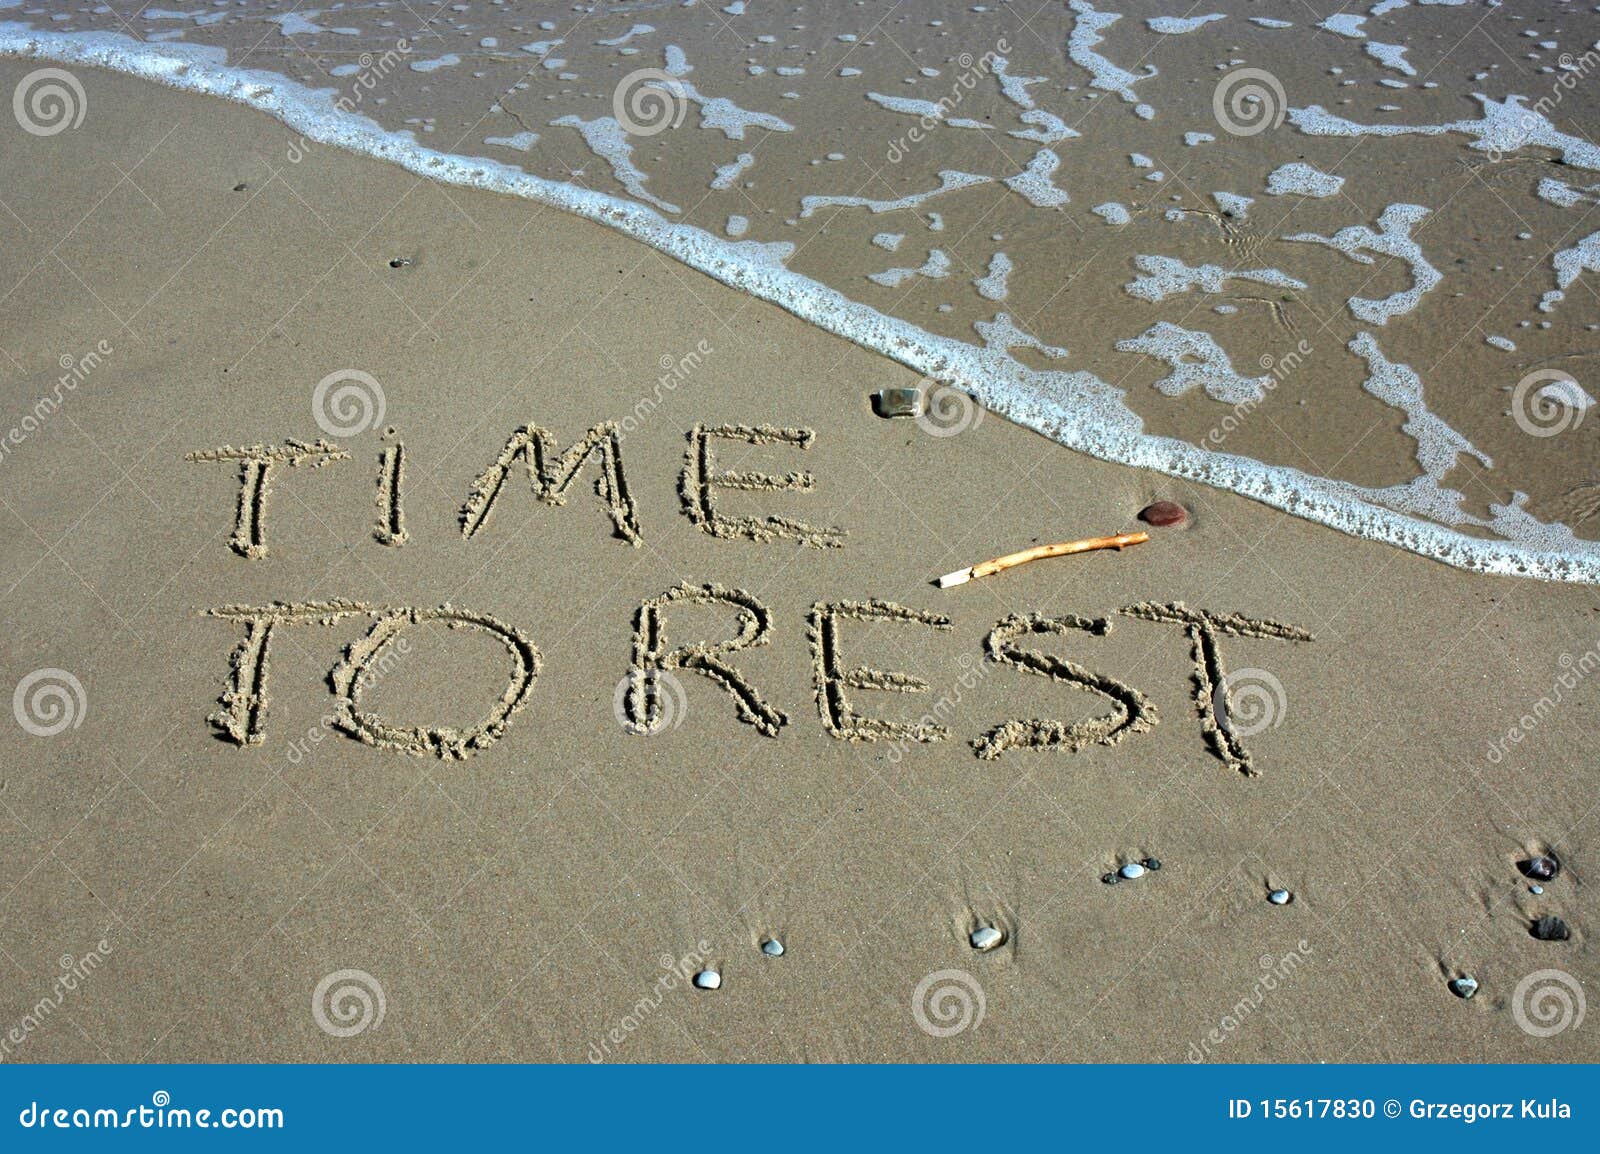 To Rest Stock Photos Free & Stock Photos from Dreamstime